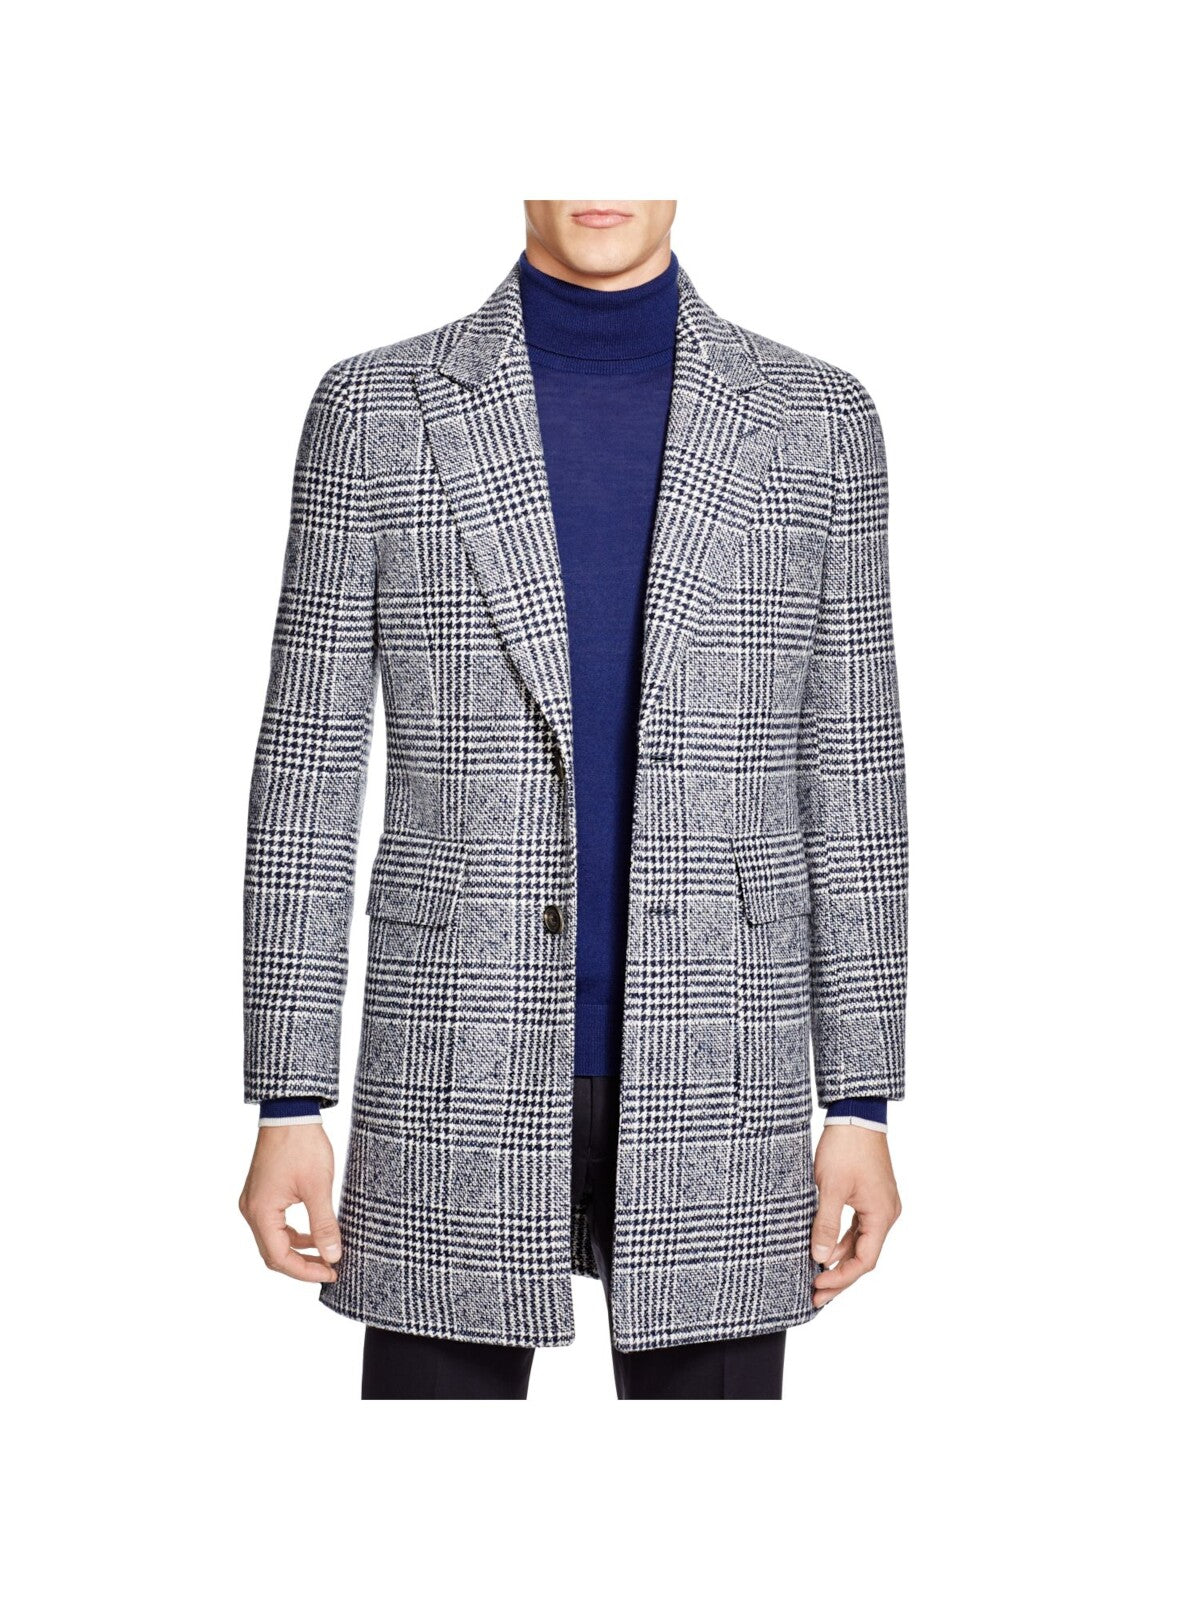 HARDY AMIES Mens Navy Single Breasted, Houndstooth Top Coat 42R